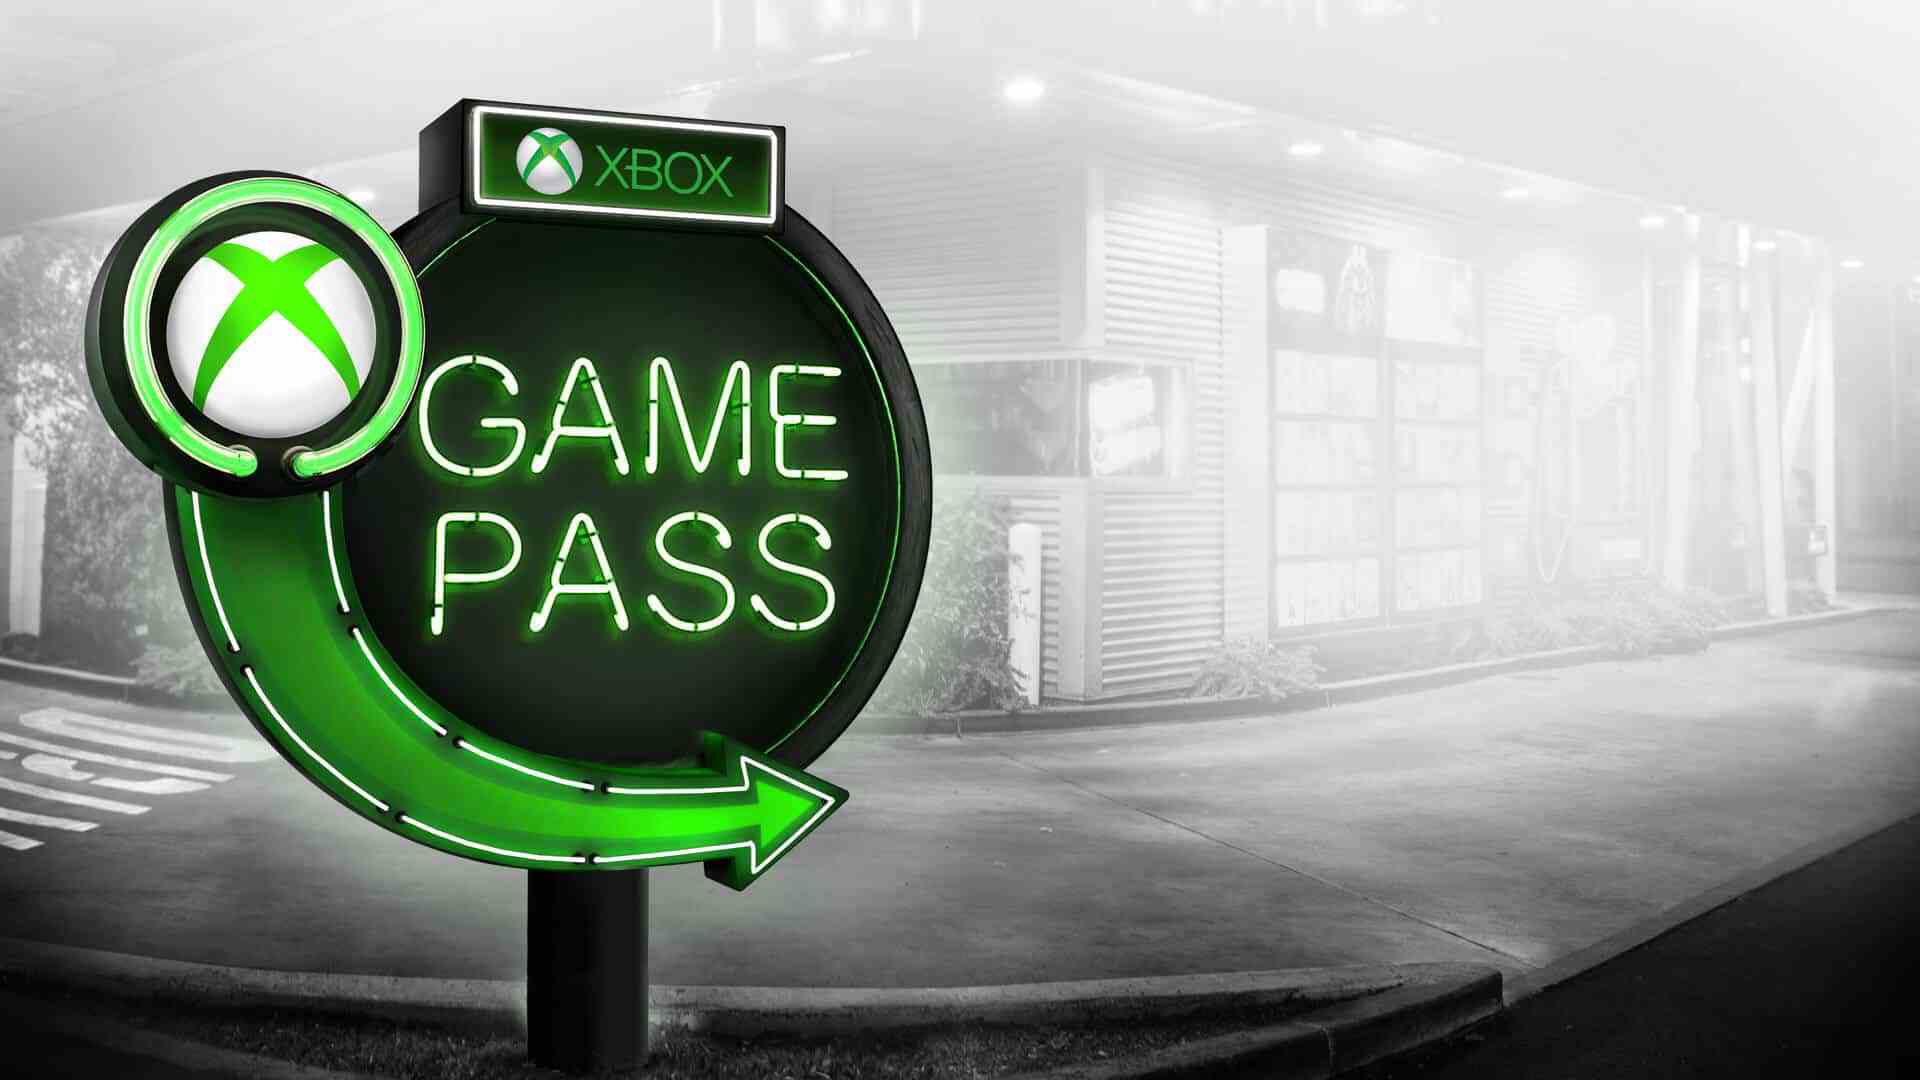 Two Major Games Are leaving Xbox Game Pass